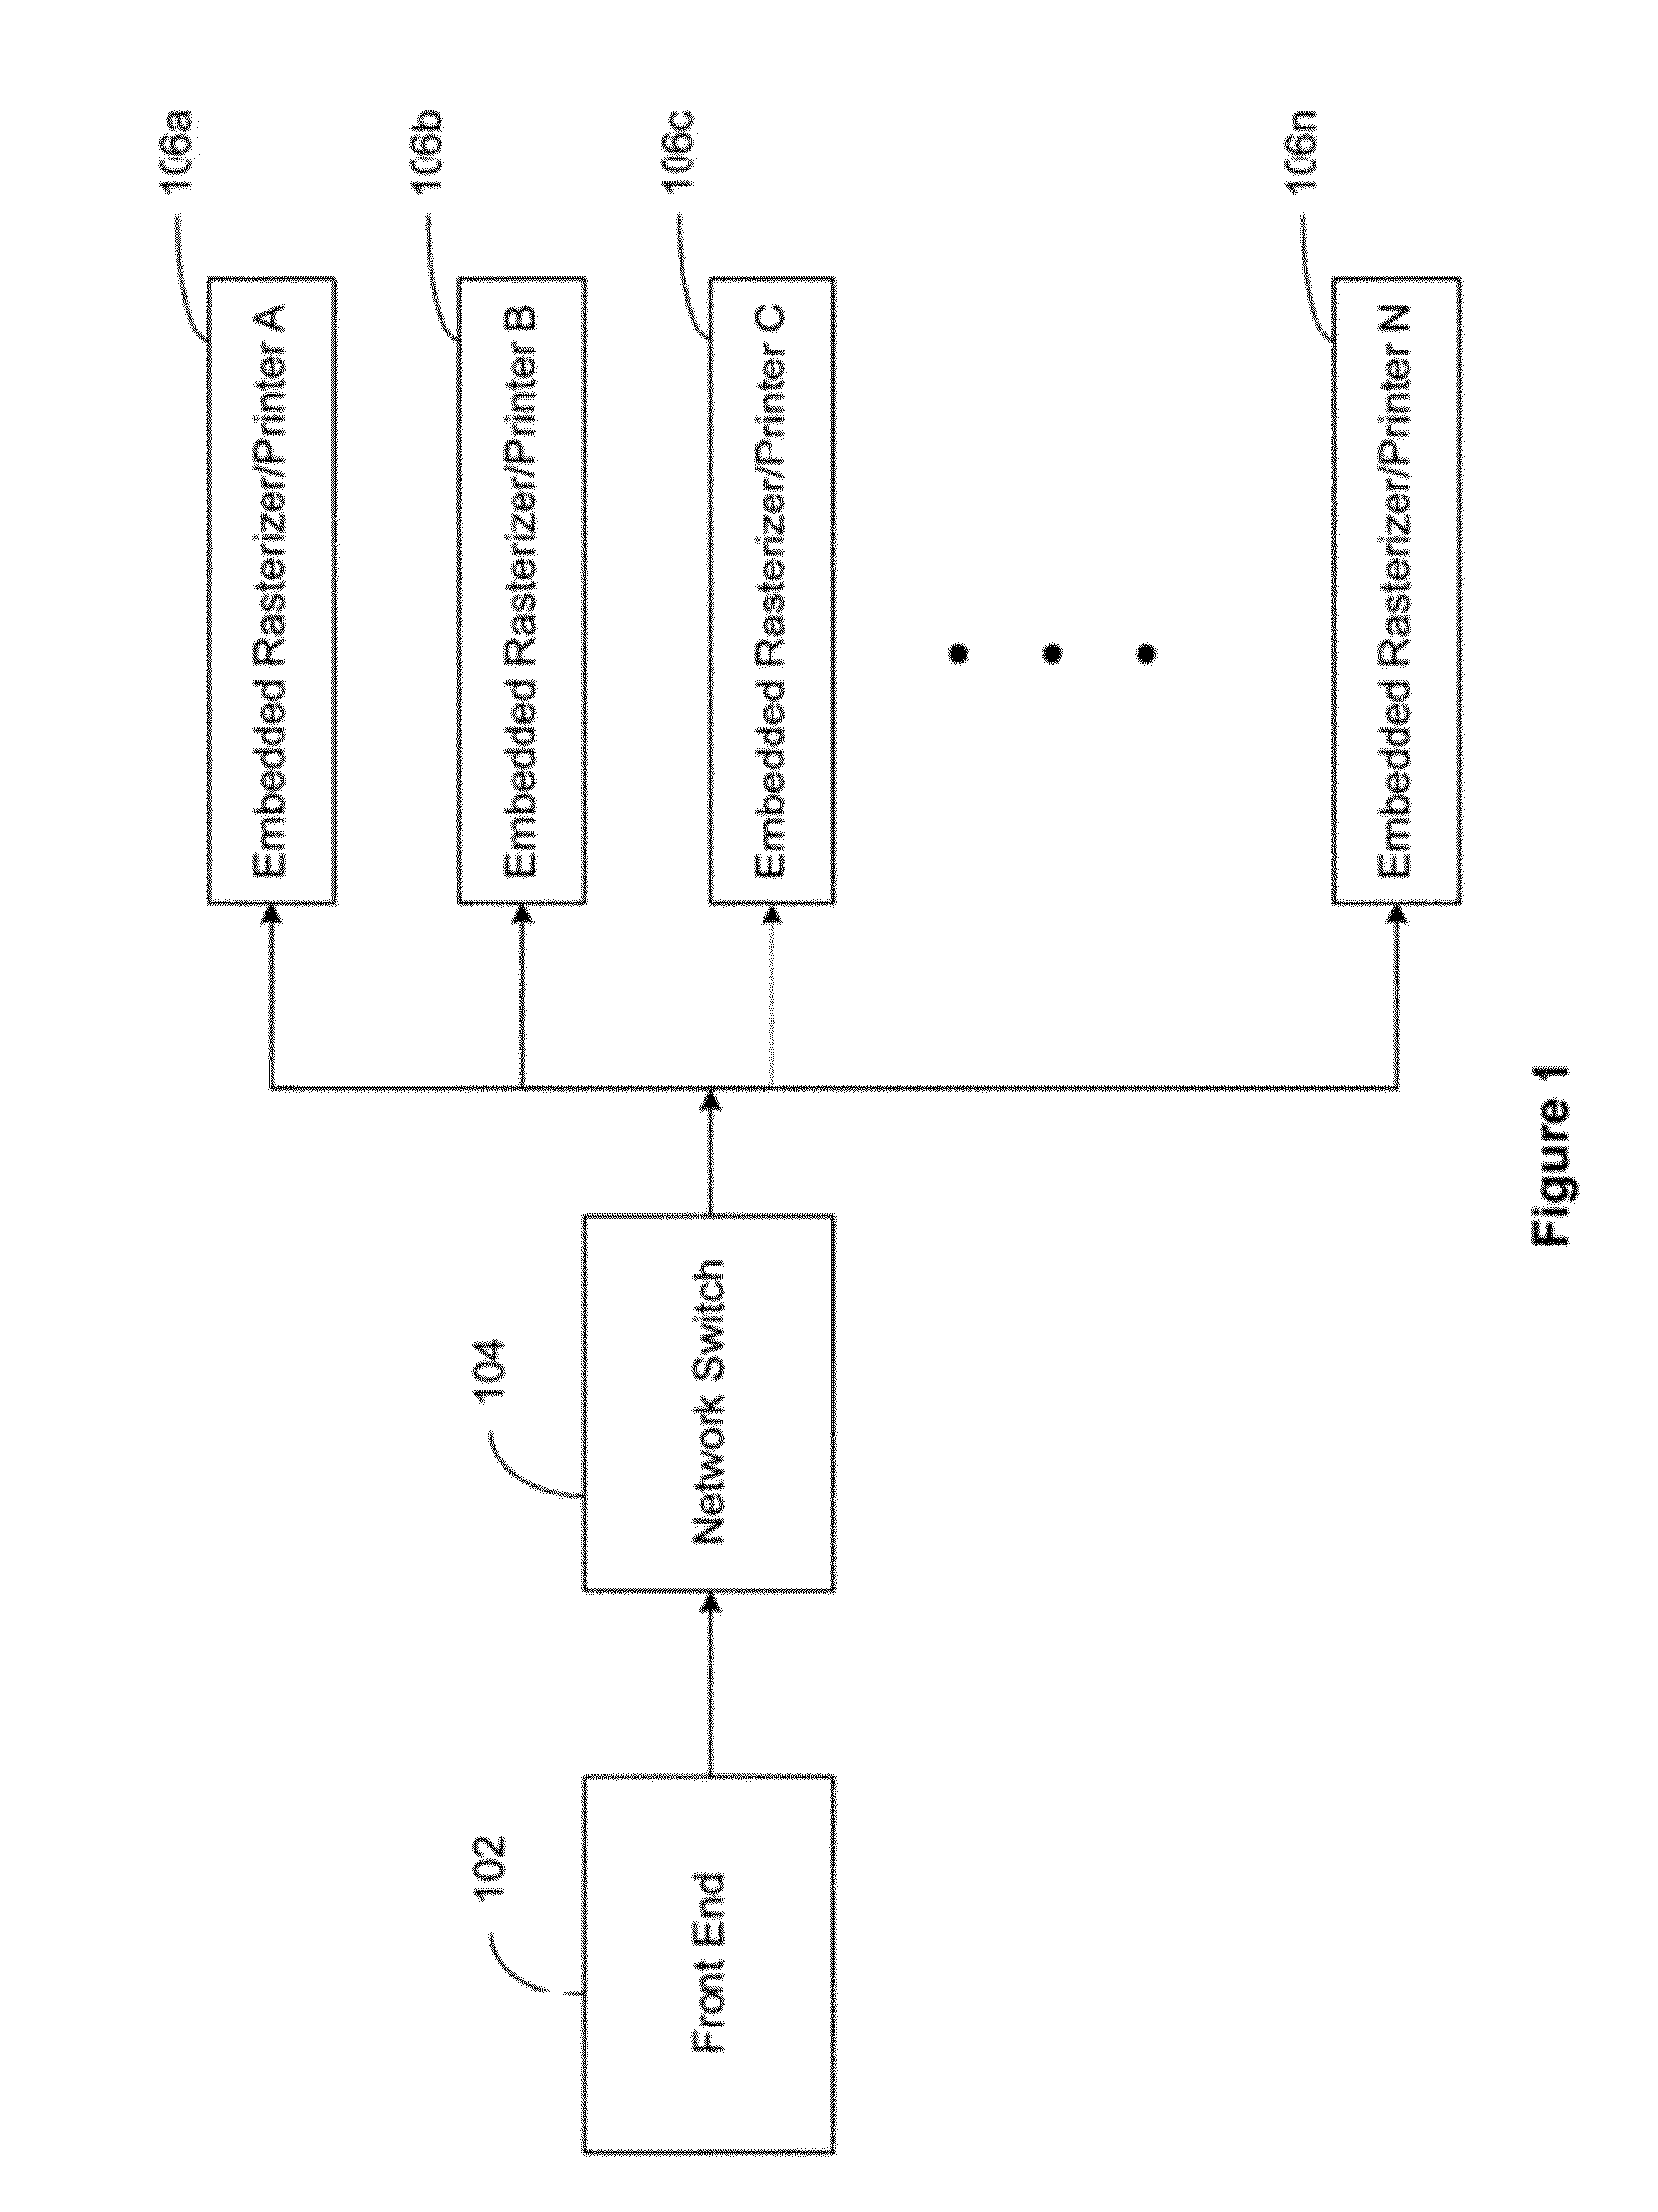 Parallel Image Processing System